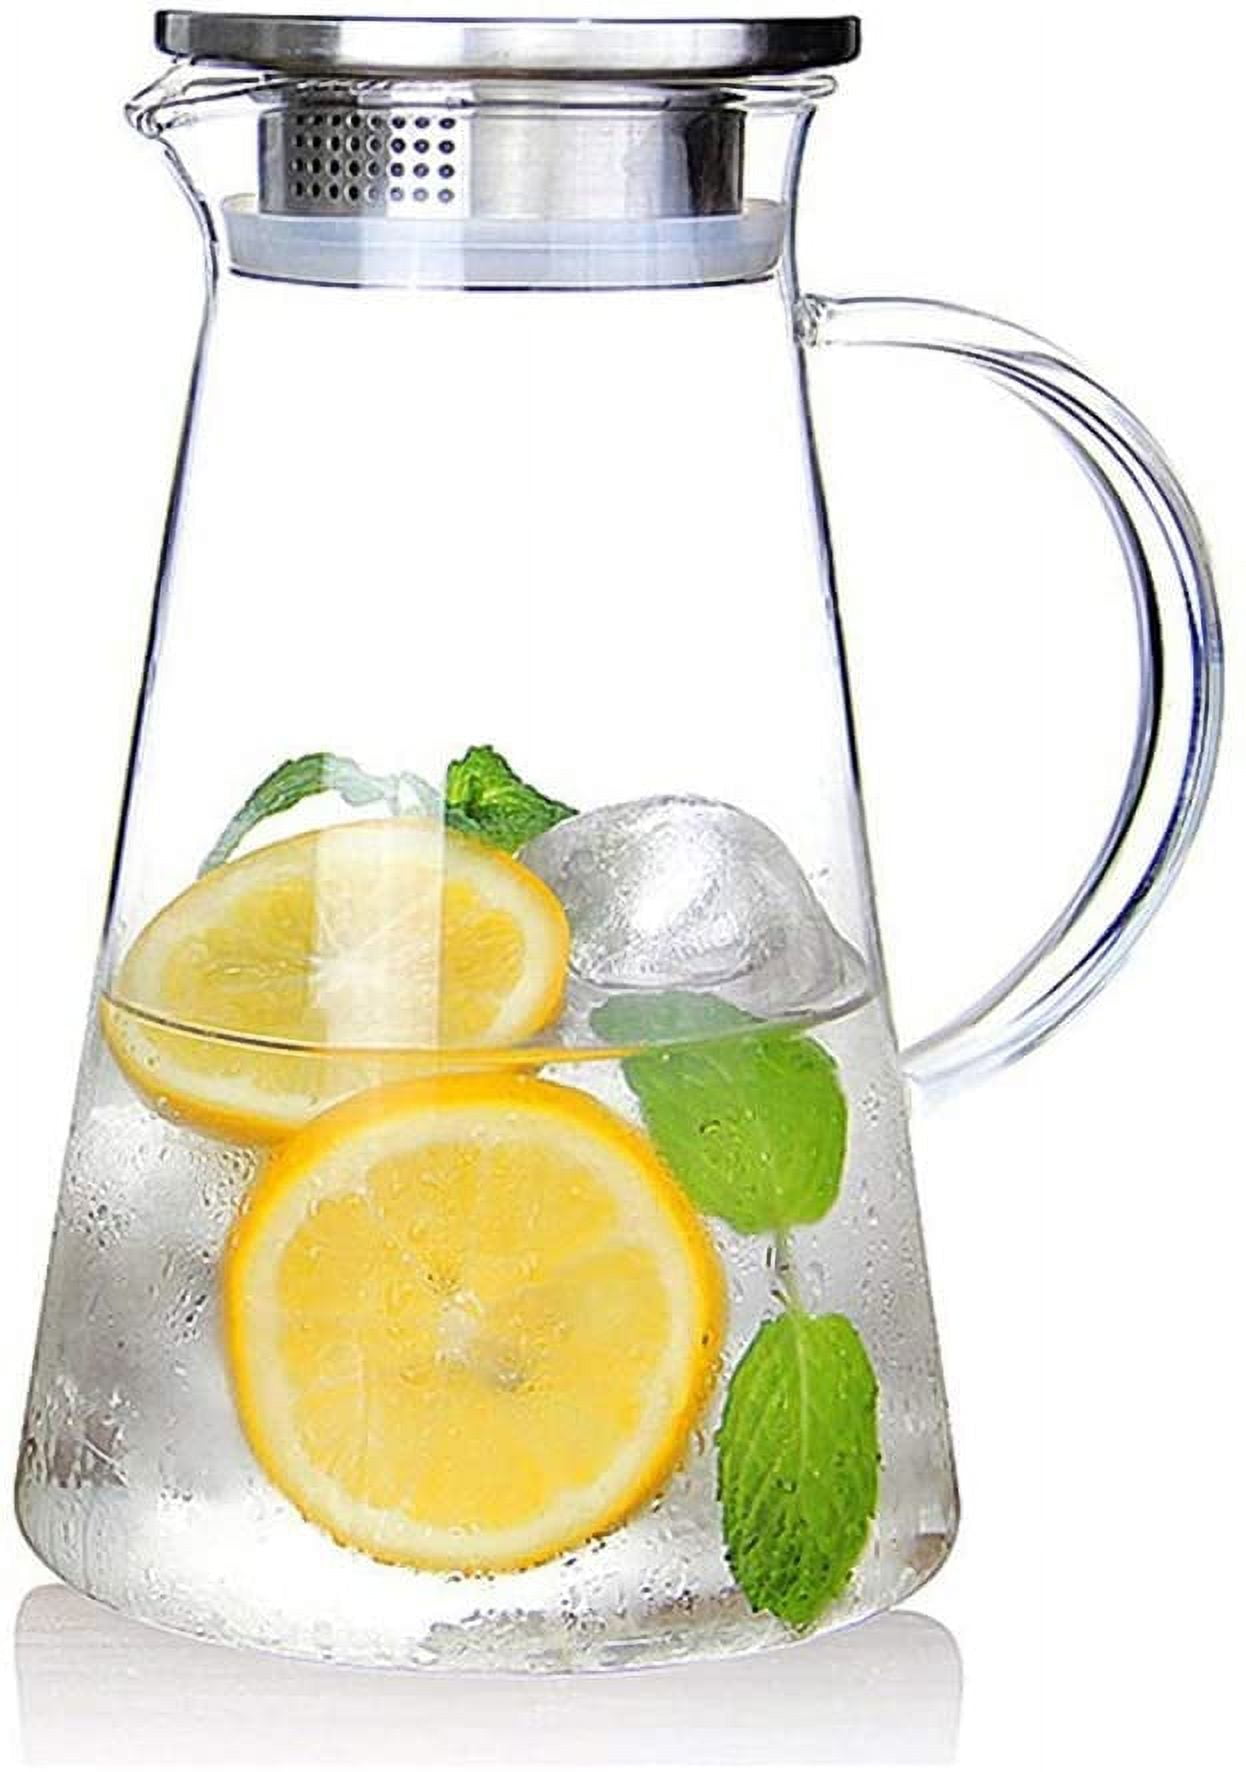 SUSTEAS 2 0 Liter 68 ounces Glass Pitcher with Lid Iced Tea